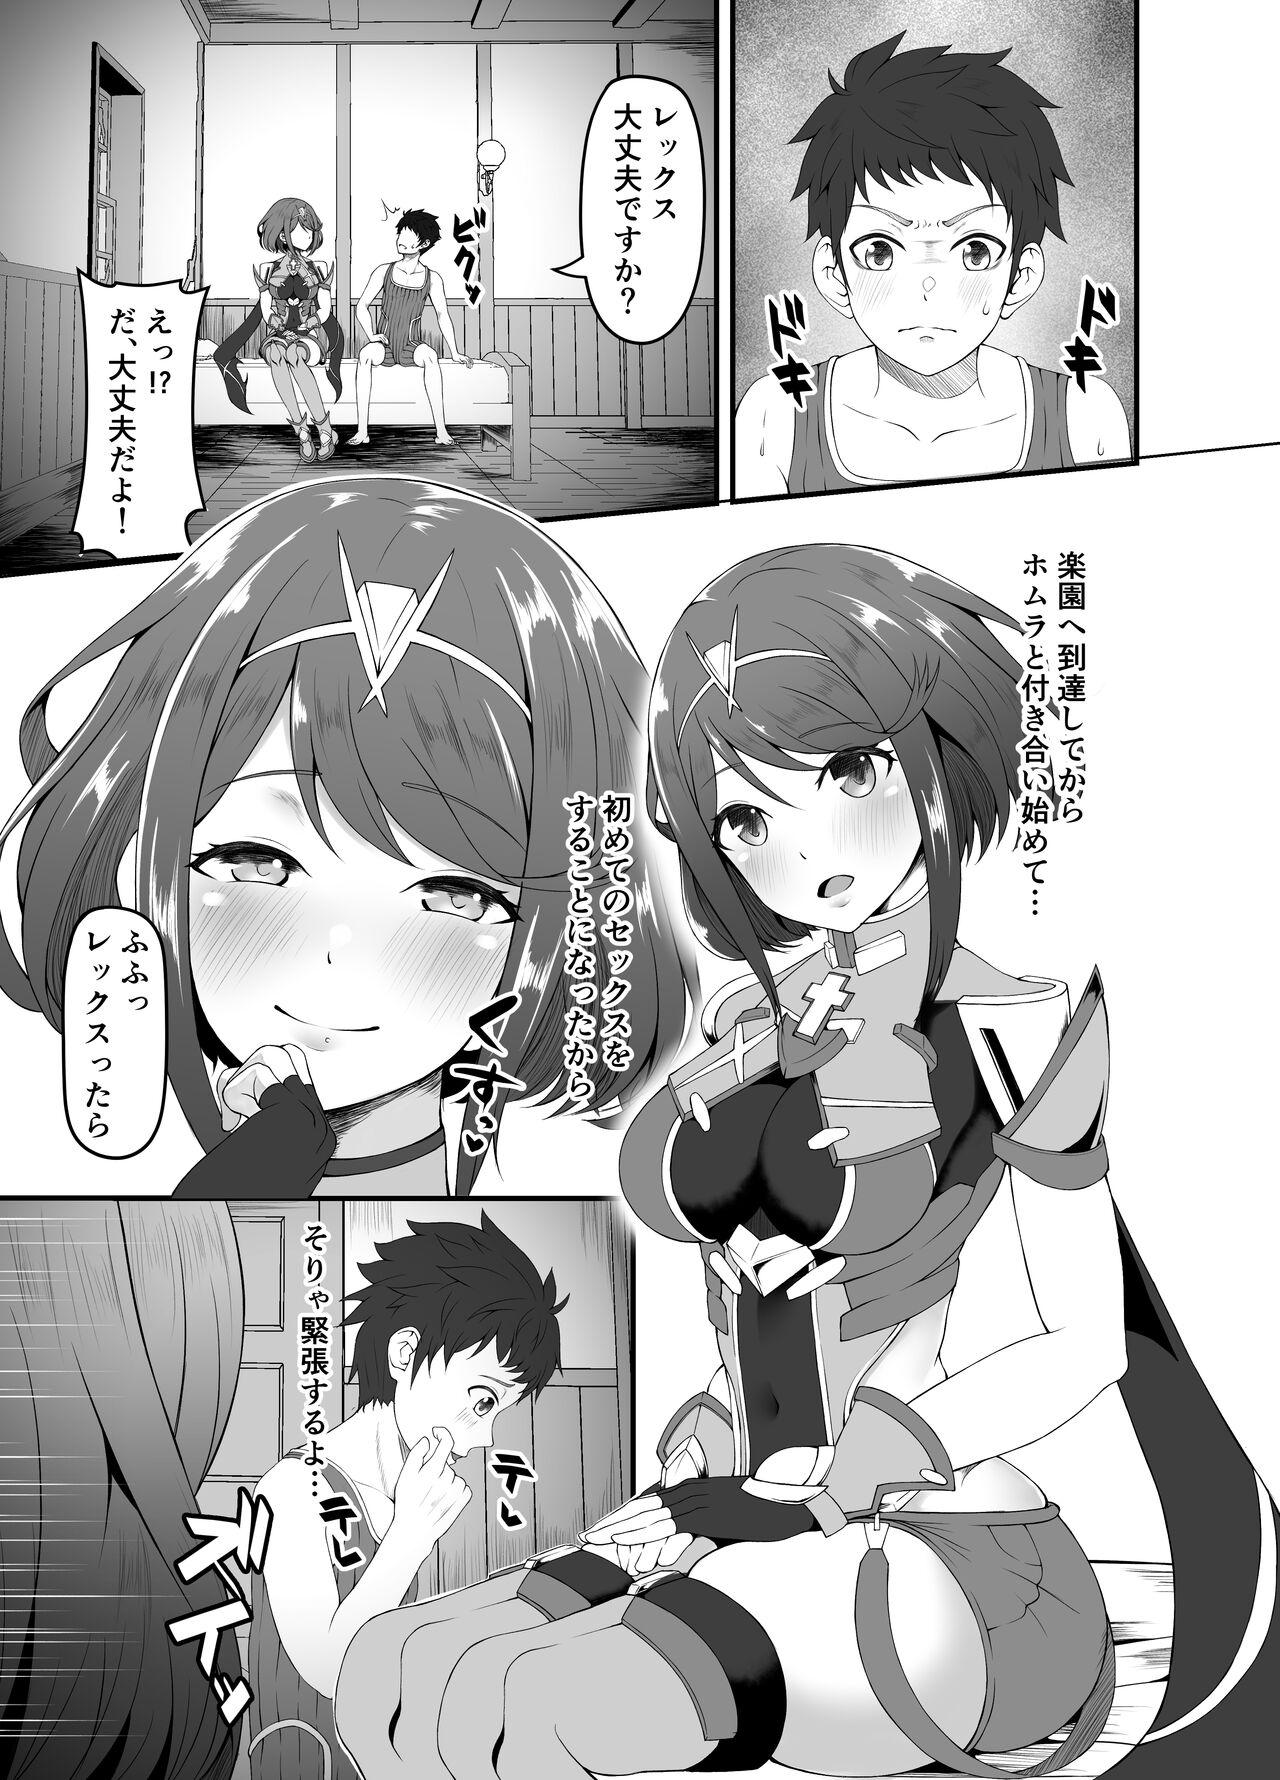 Private Sex 【ゼノブレ2】君と初めて繋がる日 - Xenoblade chronicles 2 Lesbo - Page 3